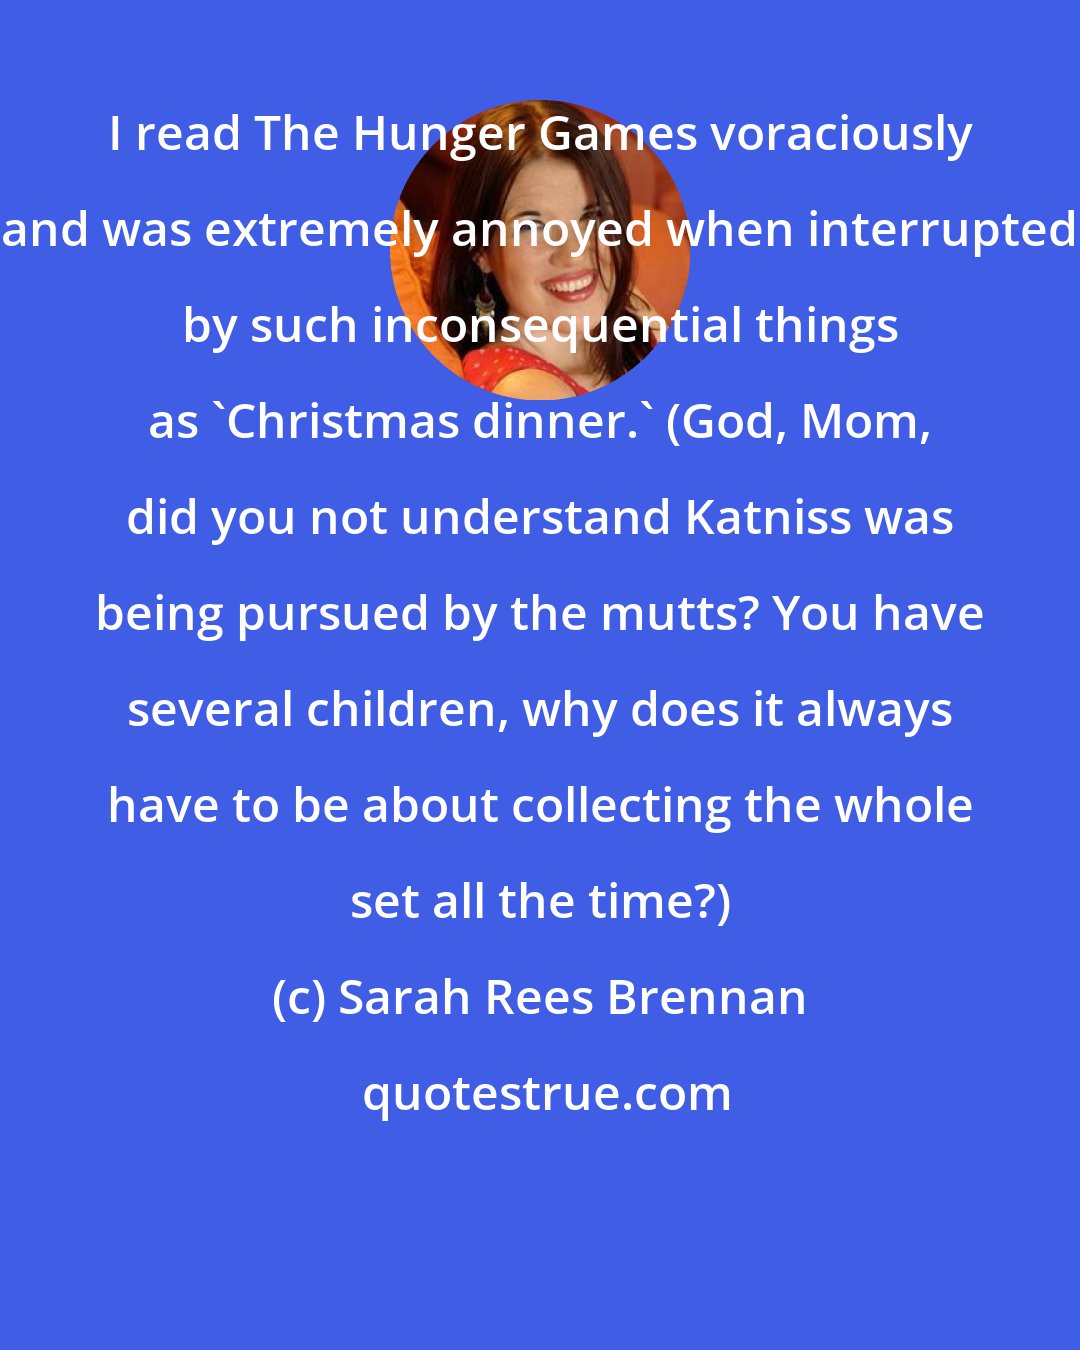 Sarah Rees Brennan: I read The Hunger Games voraciously and was extremely annoyed when interrupted by such inconsequential things as 'Christmas dinner.' (God, Mom, did you not understand Katniss was being pursued by the mutts? You have several children, why does it always have to be about collecting the whole set all the time?)